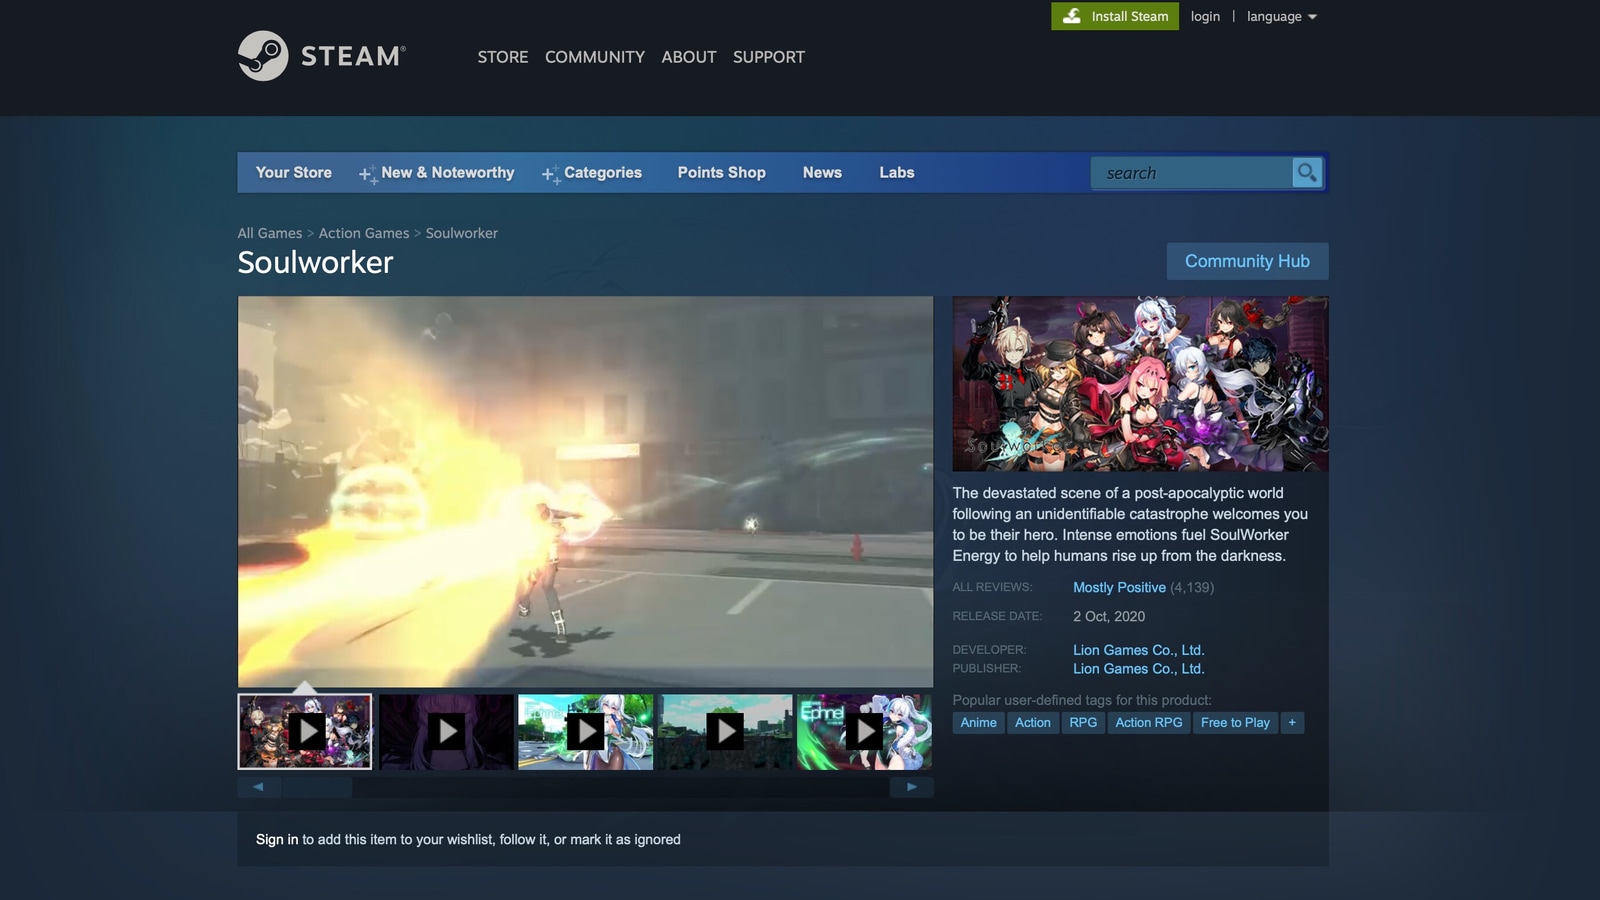 News - What are Your Most Played Games on Steam?